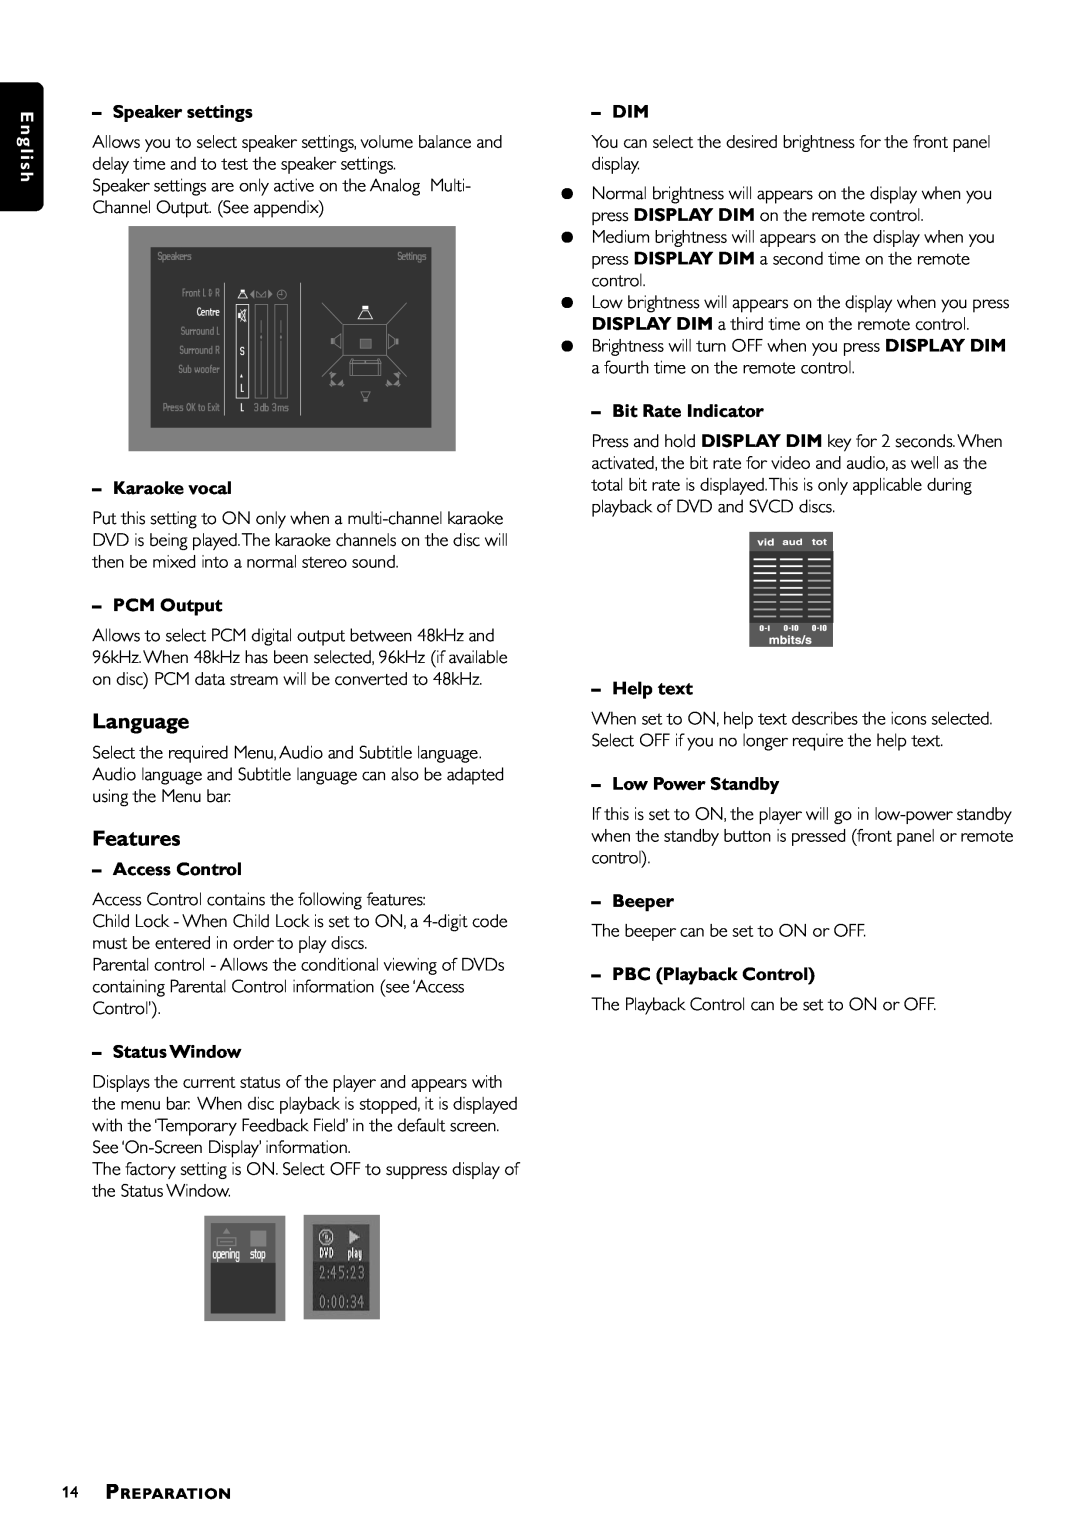 Philips DVD952/021 Language, Features, E n g l i s h, Speaker settings, Karaoke vocal, PCM Output, Access Control, Beeper 